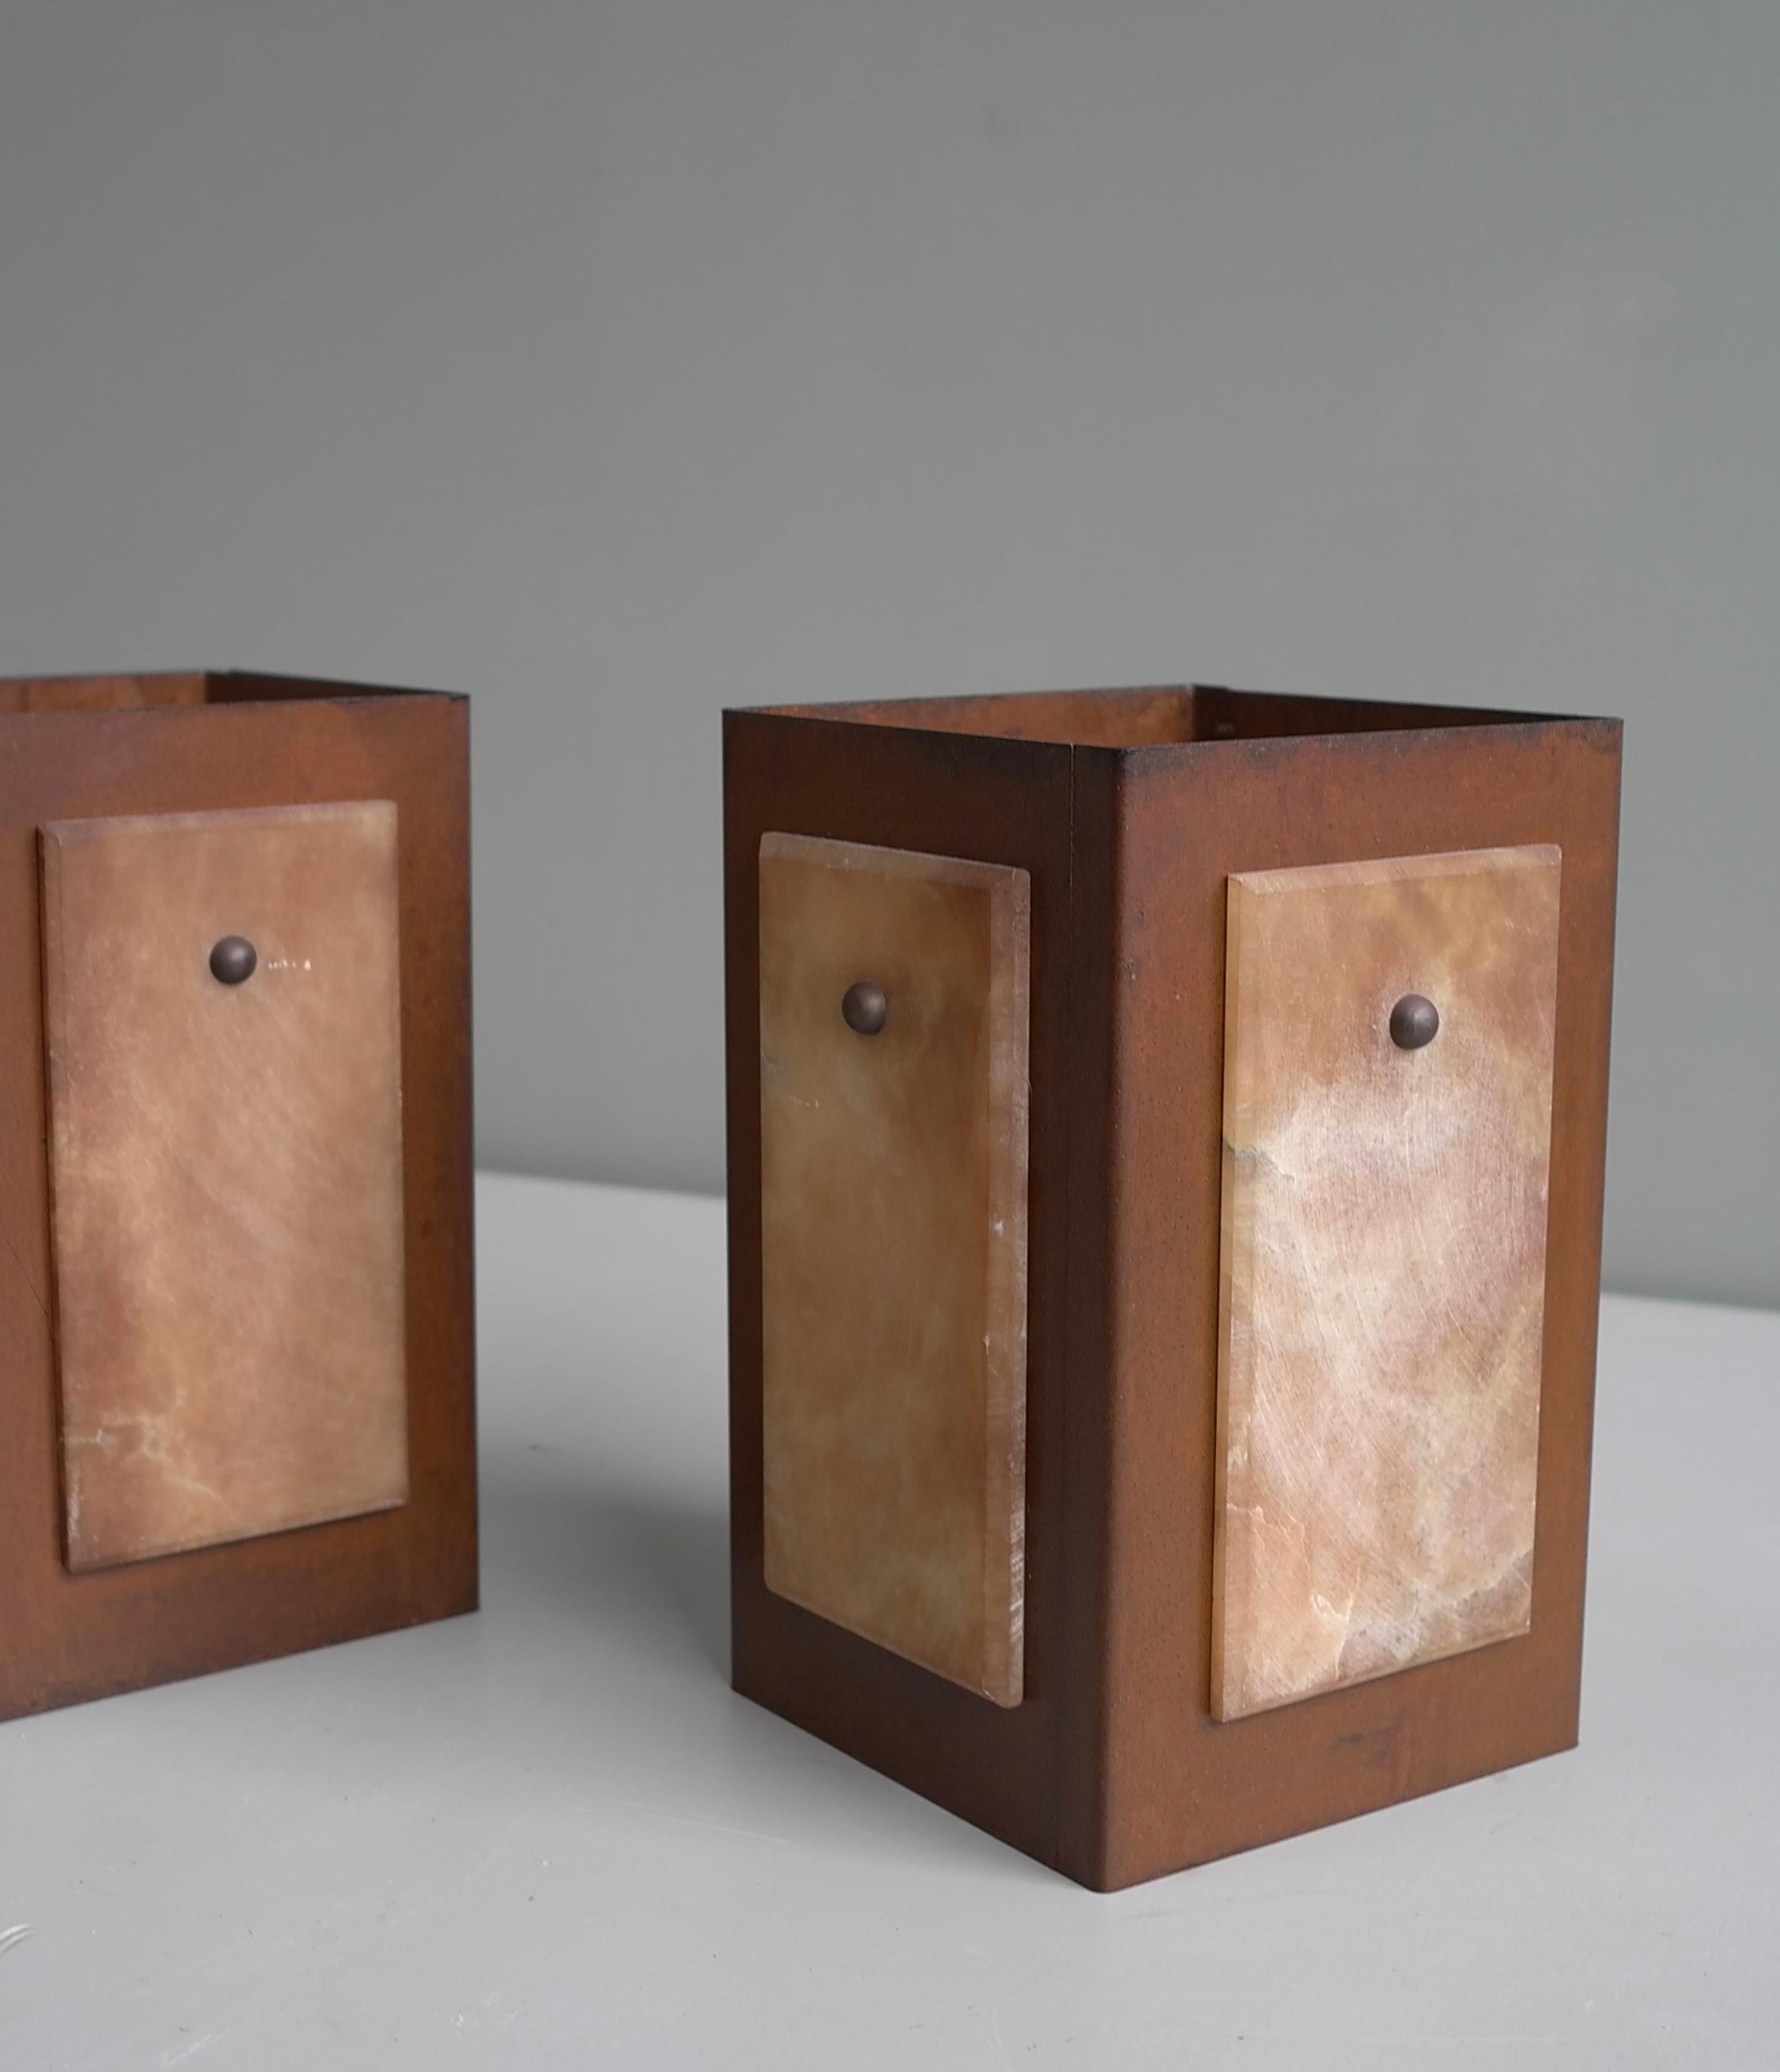 Table Lamps in Alabaster Stone and Rusty Metal, by Pegasam, Spain 1970s For Sale 3